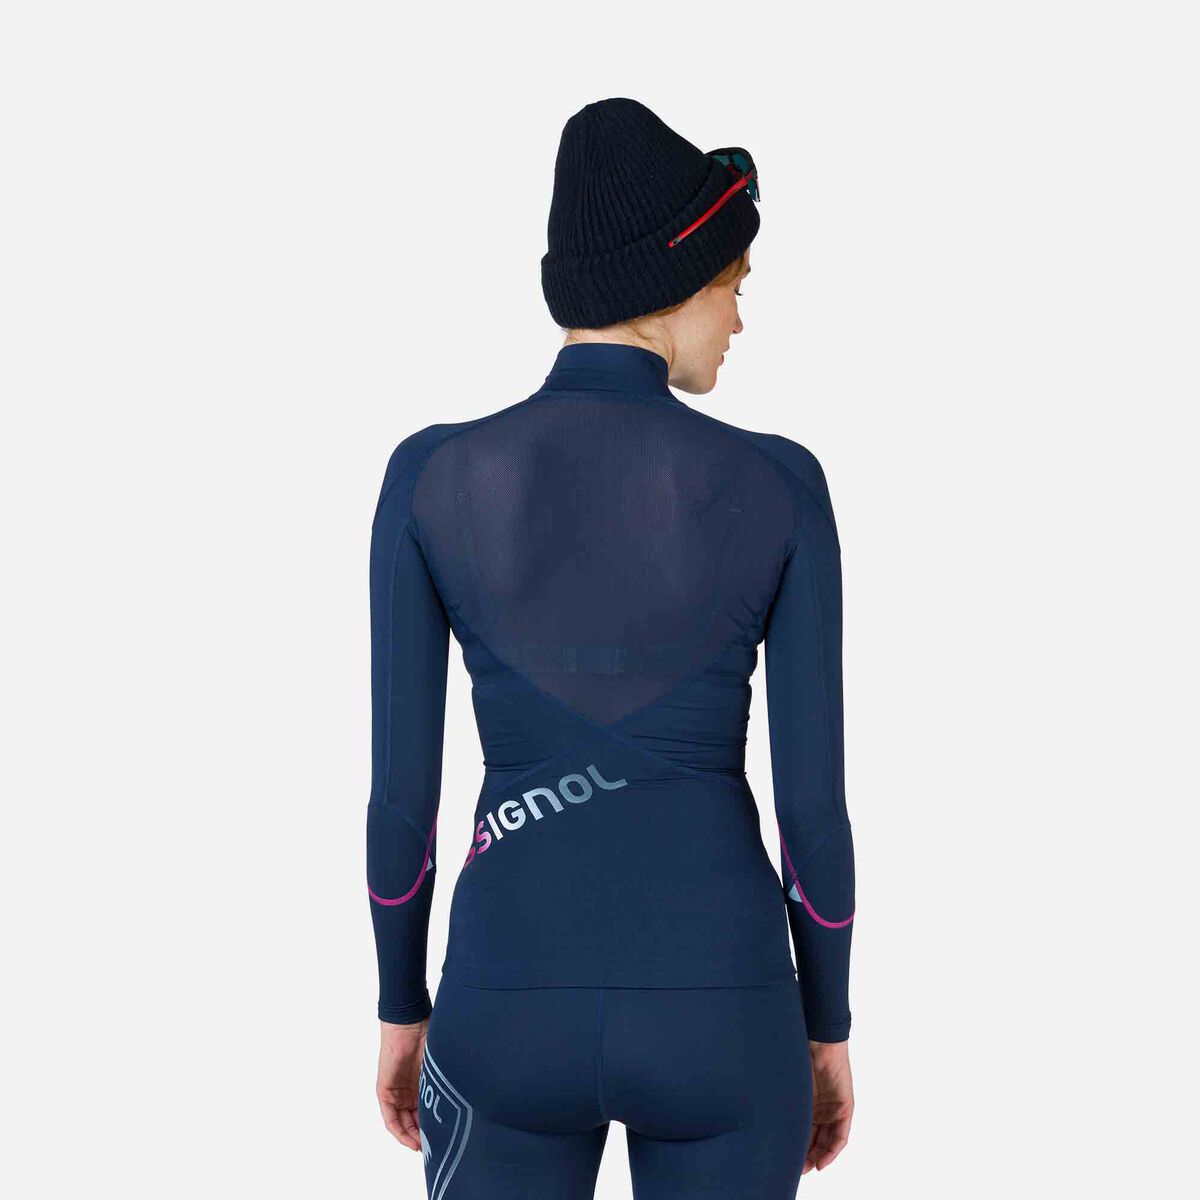 Rossignol Infini Compression Race Tights Neon Red Base layer  bottoms/thermal leggings : Snowleader